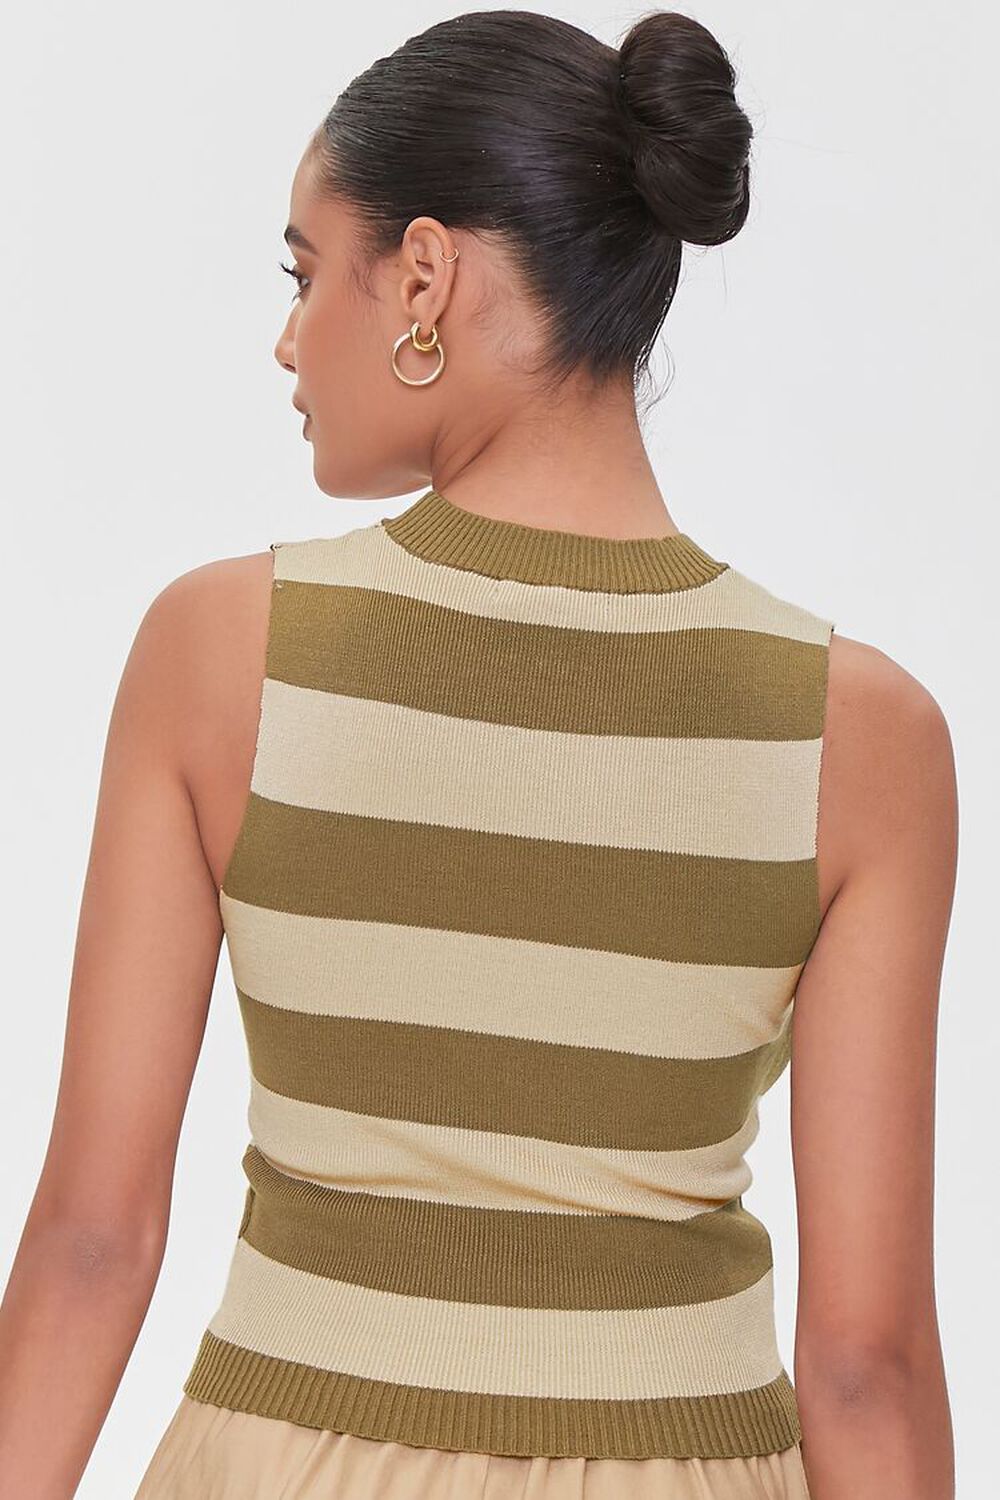 BROWN/TAUPE Sweater-Knit Striped Tank Top, image 3